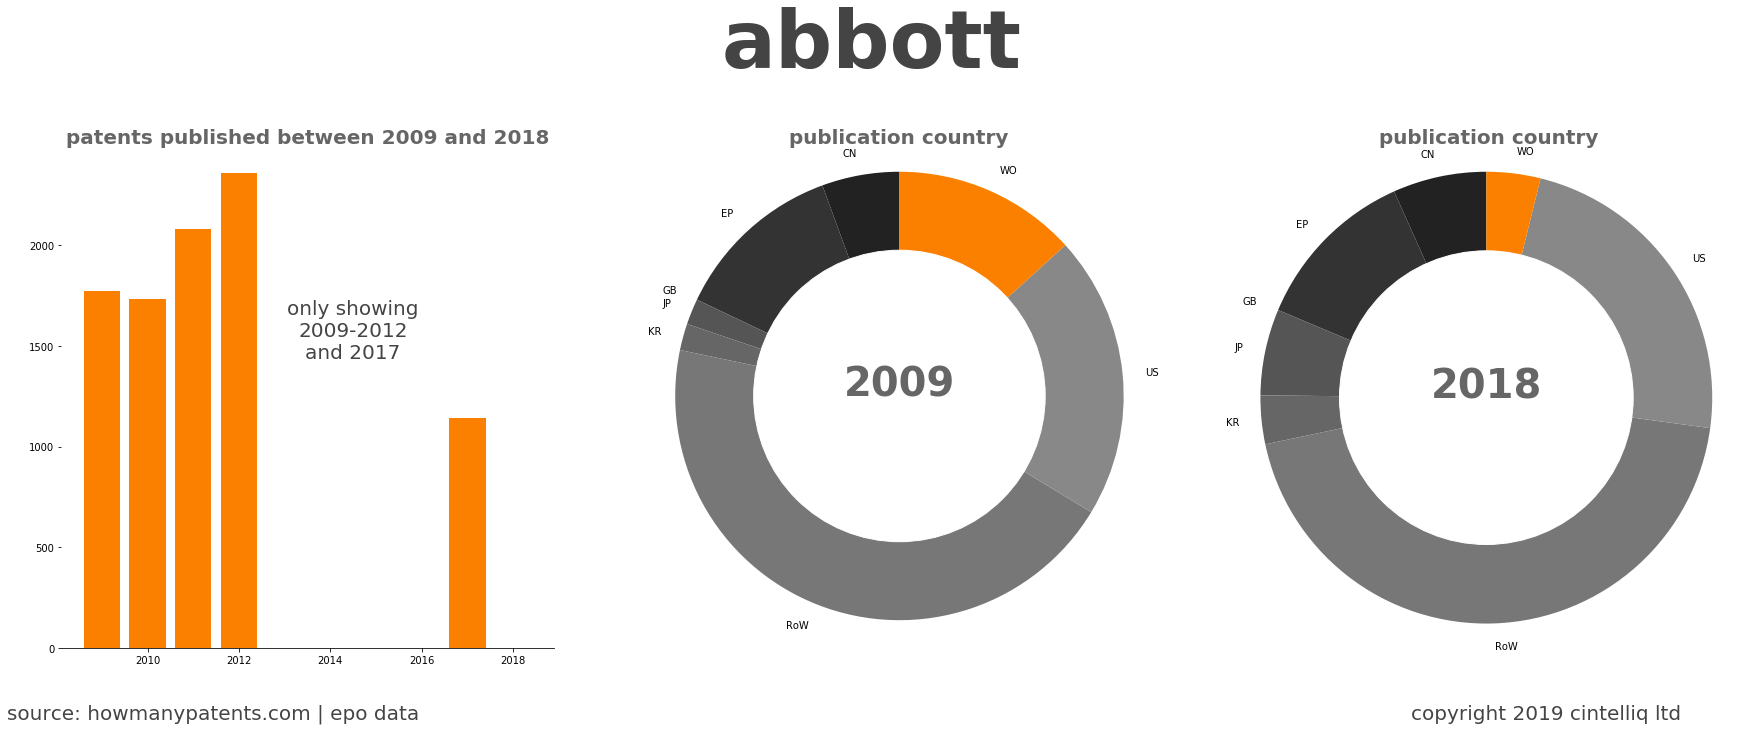 summary of patents for Abbott